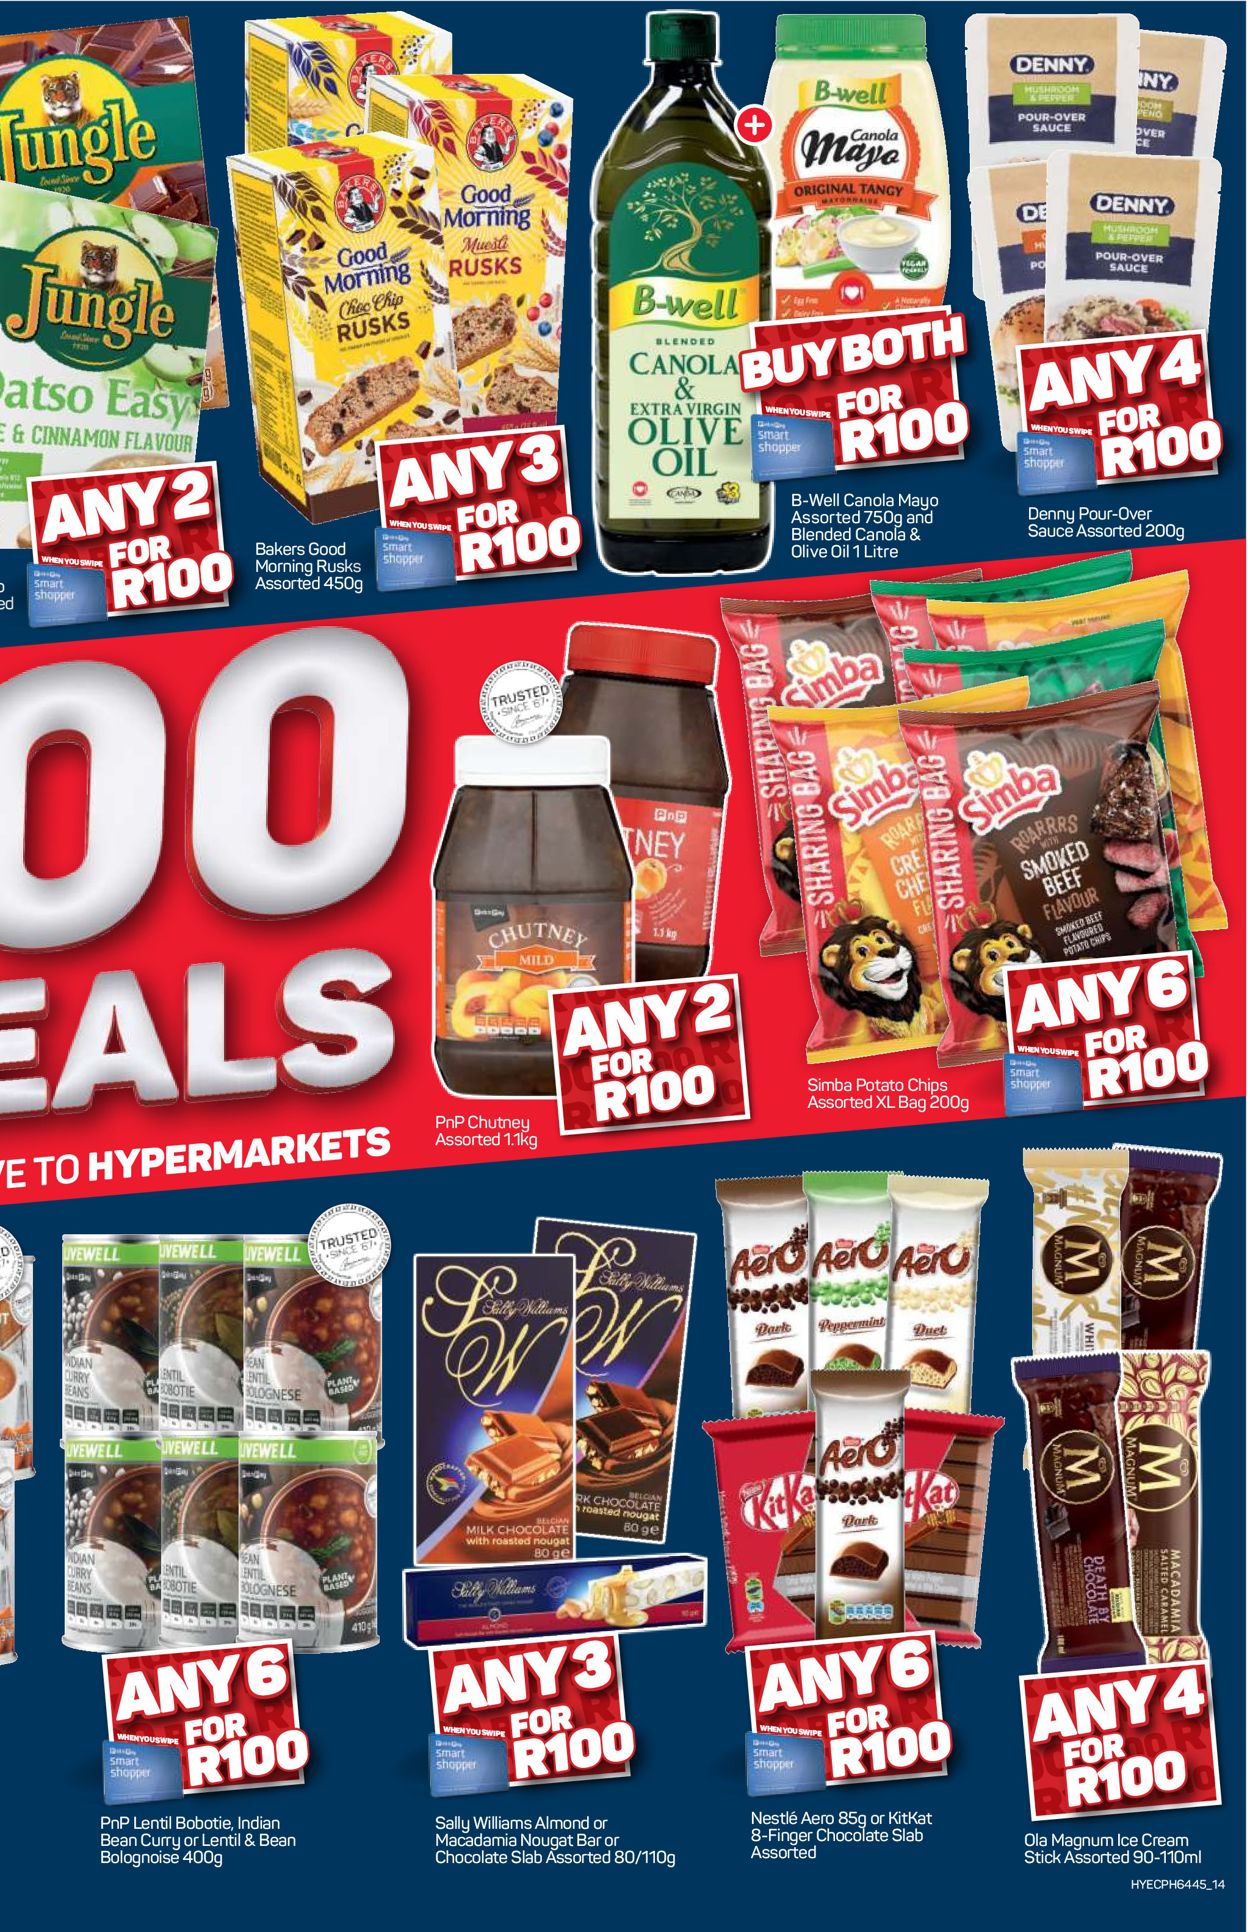 Pick n Pay Catalogue - 2022/05/23-2022/06/07 (Page 15)